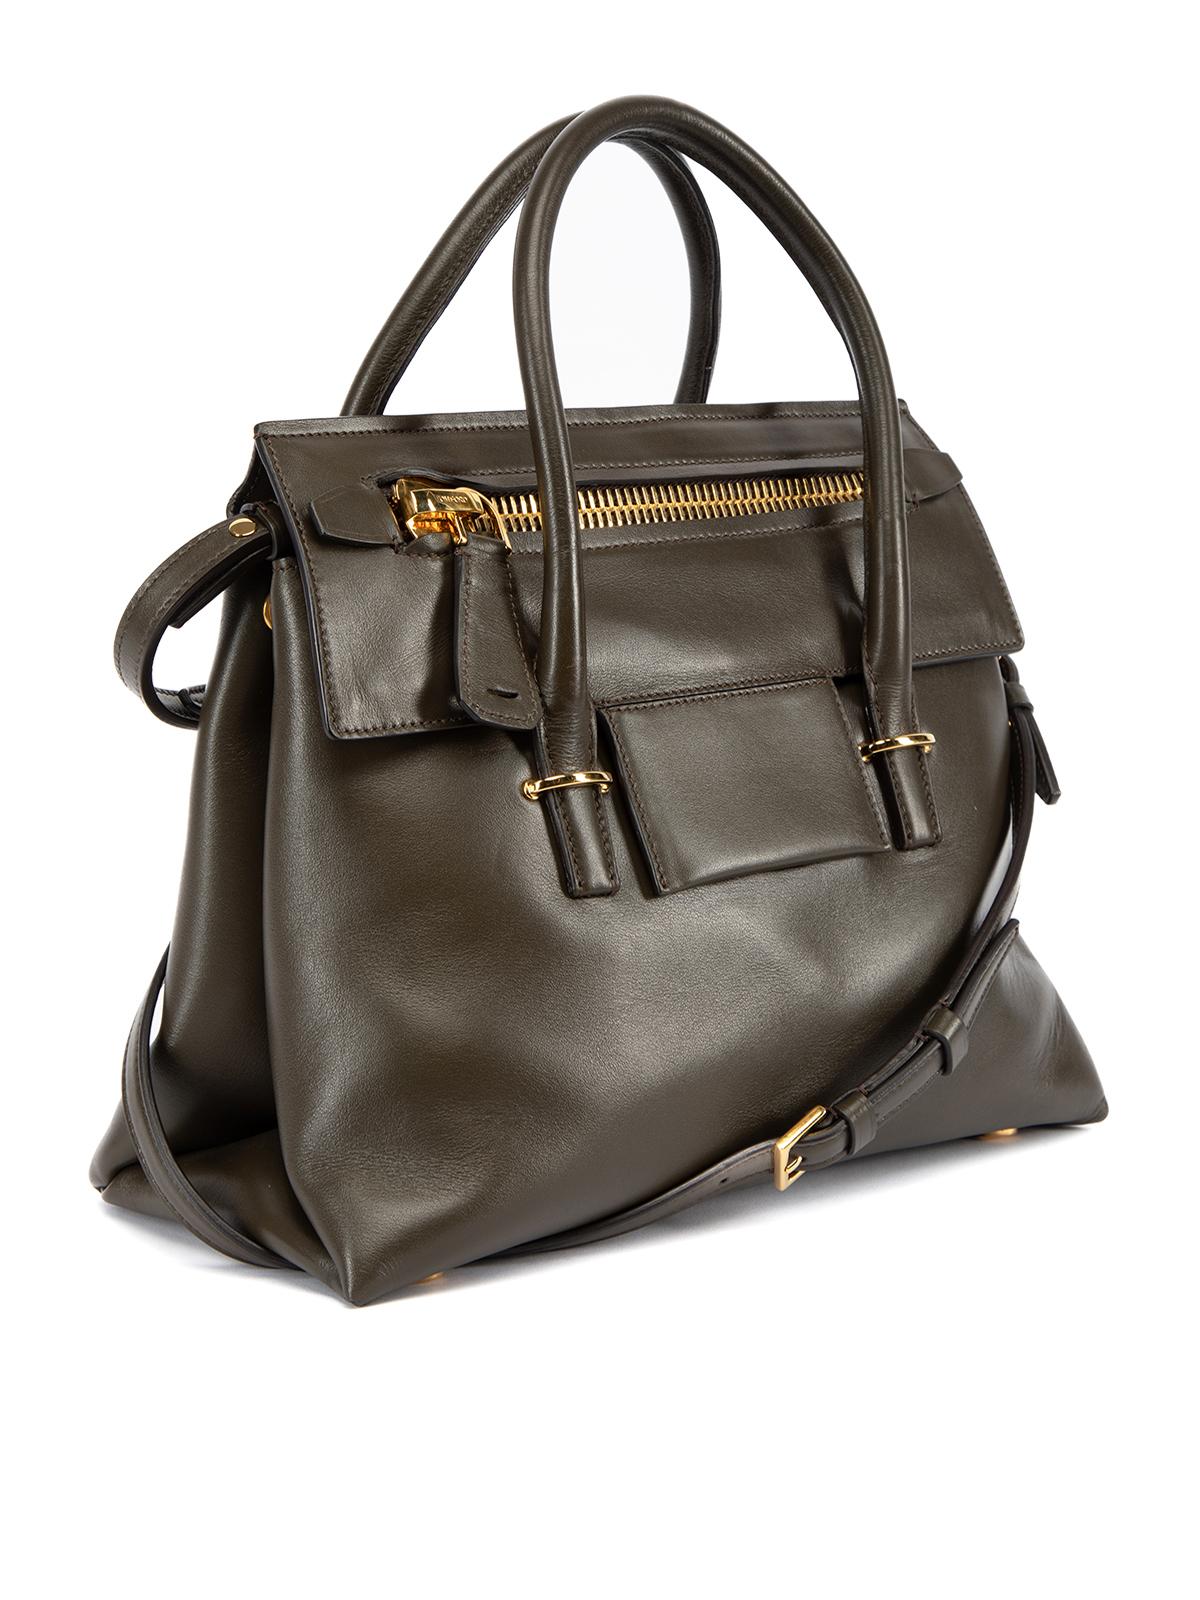 CONDITION is Very good. Minimal wear to bag is evident. Minor scratches on gold hardware on this Tom Ford designer resale item. This item comes with dust bag. Details Brown Leather Top handle bag Front flap with zip pocket TF logo on front 2x Padded